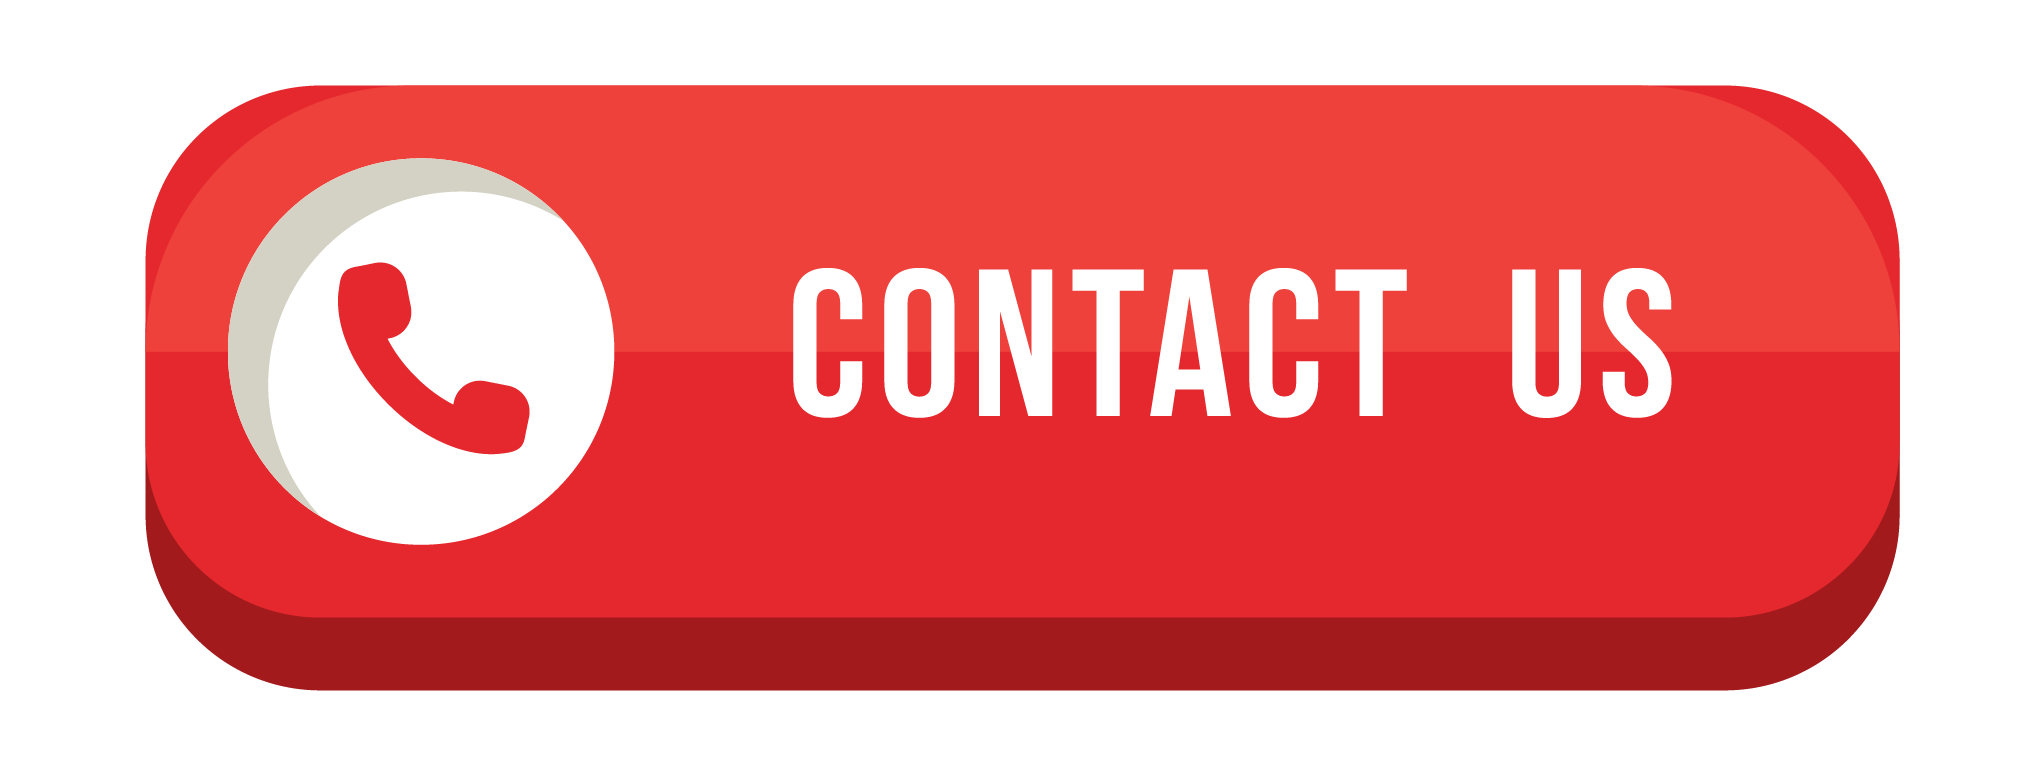 Contact Us PNG Free Commercial Use Images  PNG Play